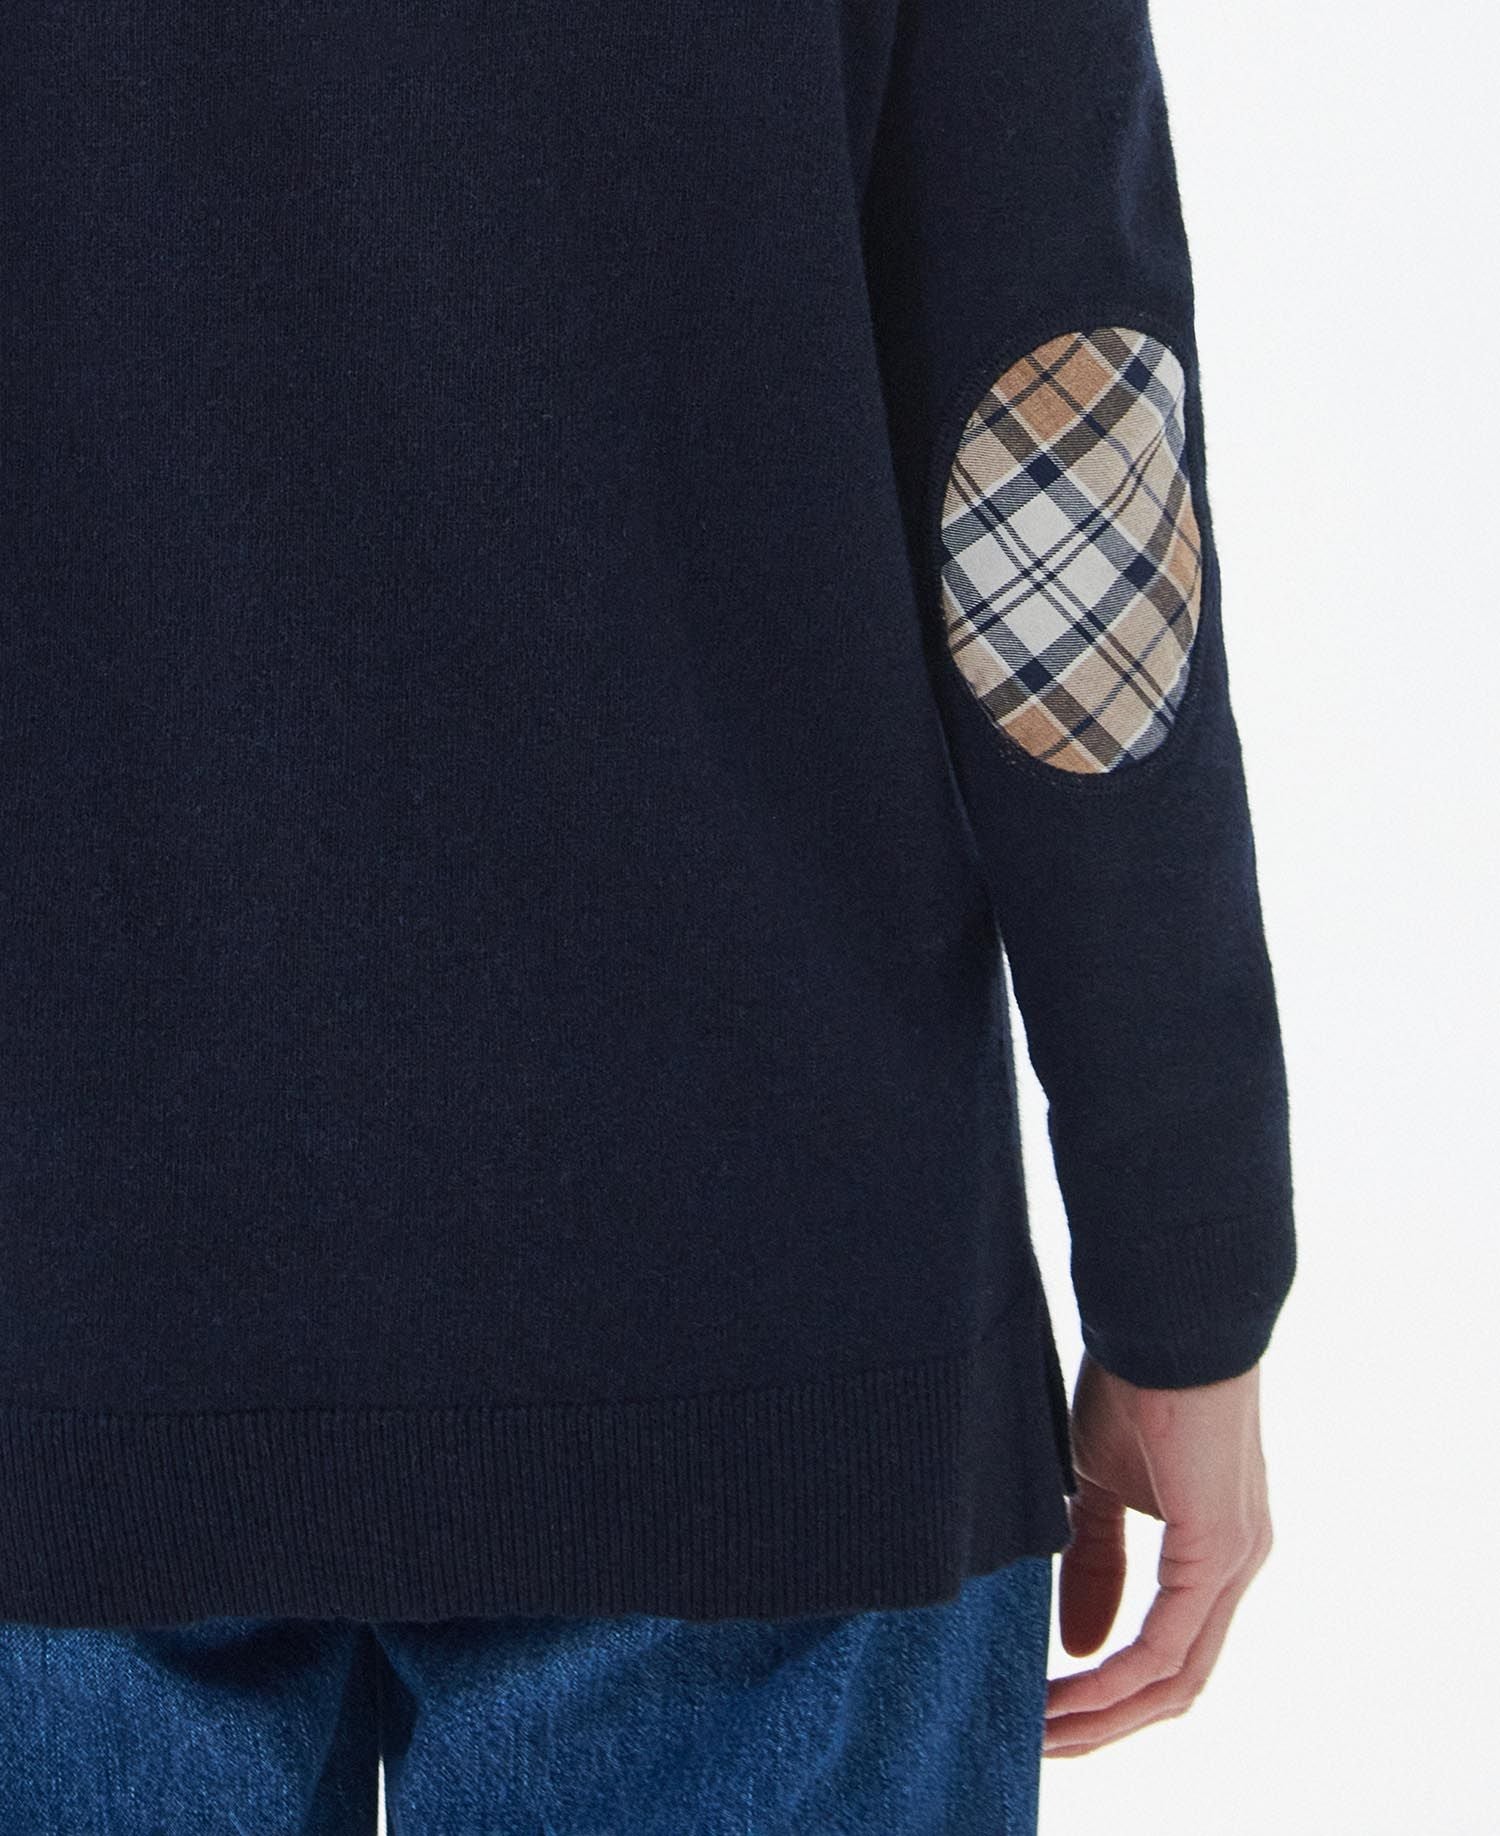 Barbour Pendle Crew Knit - Navy/Fawn